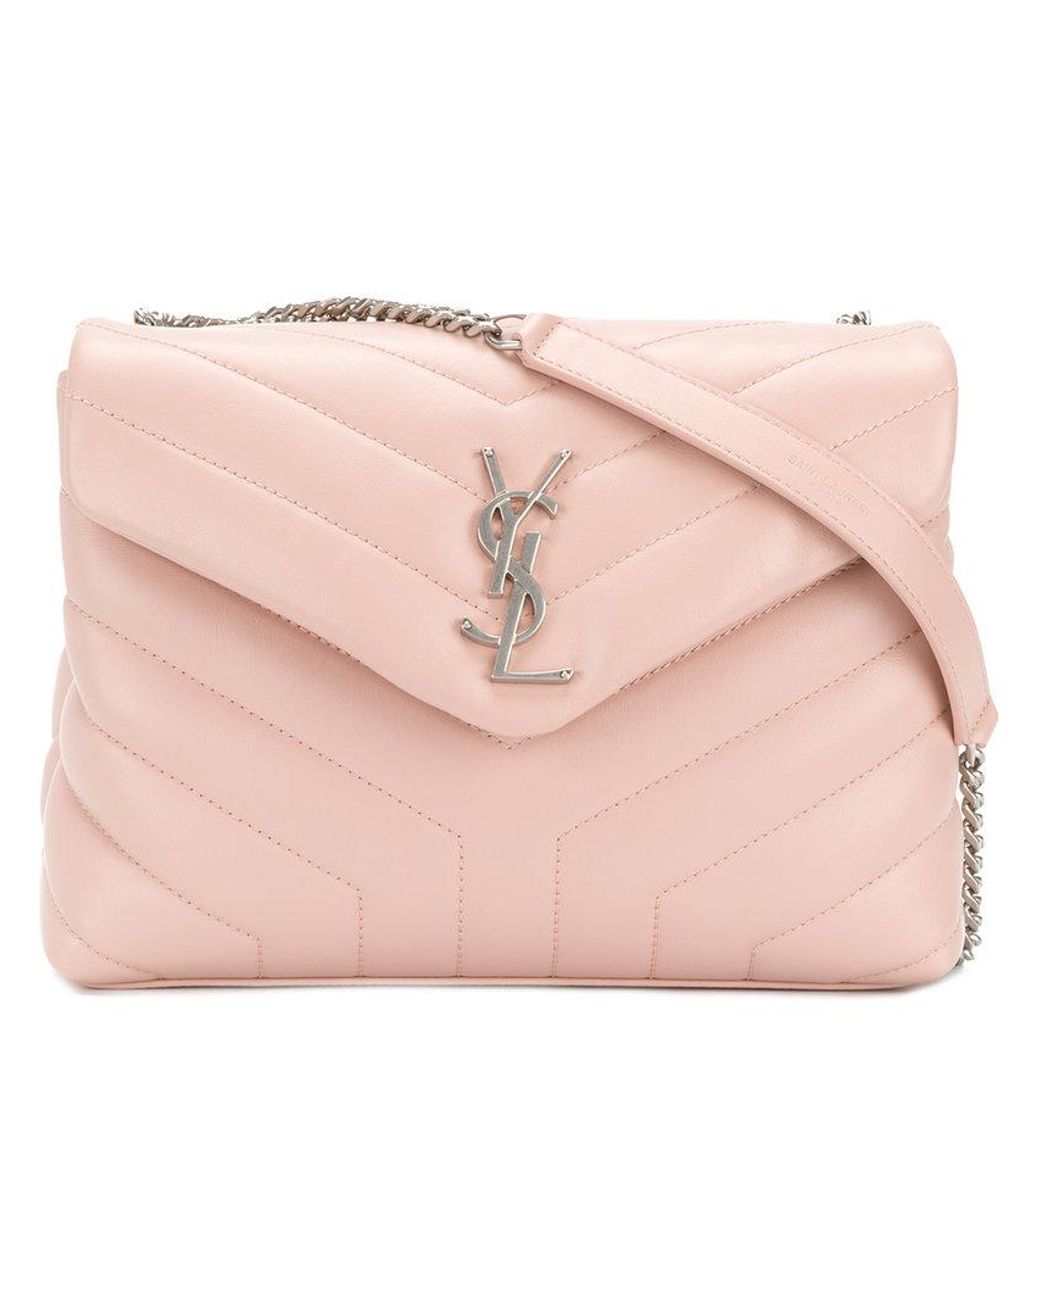 Saint Laurent Small Loulou Chain Bag in Pink | Lyst